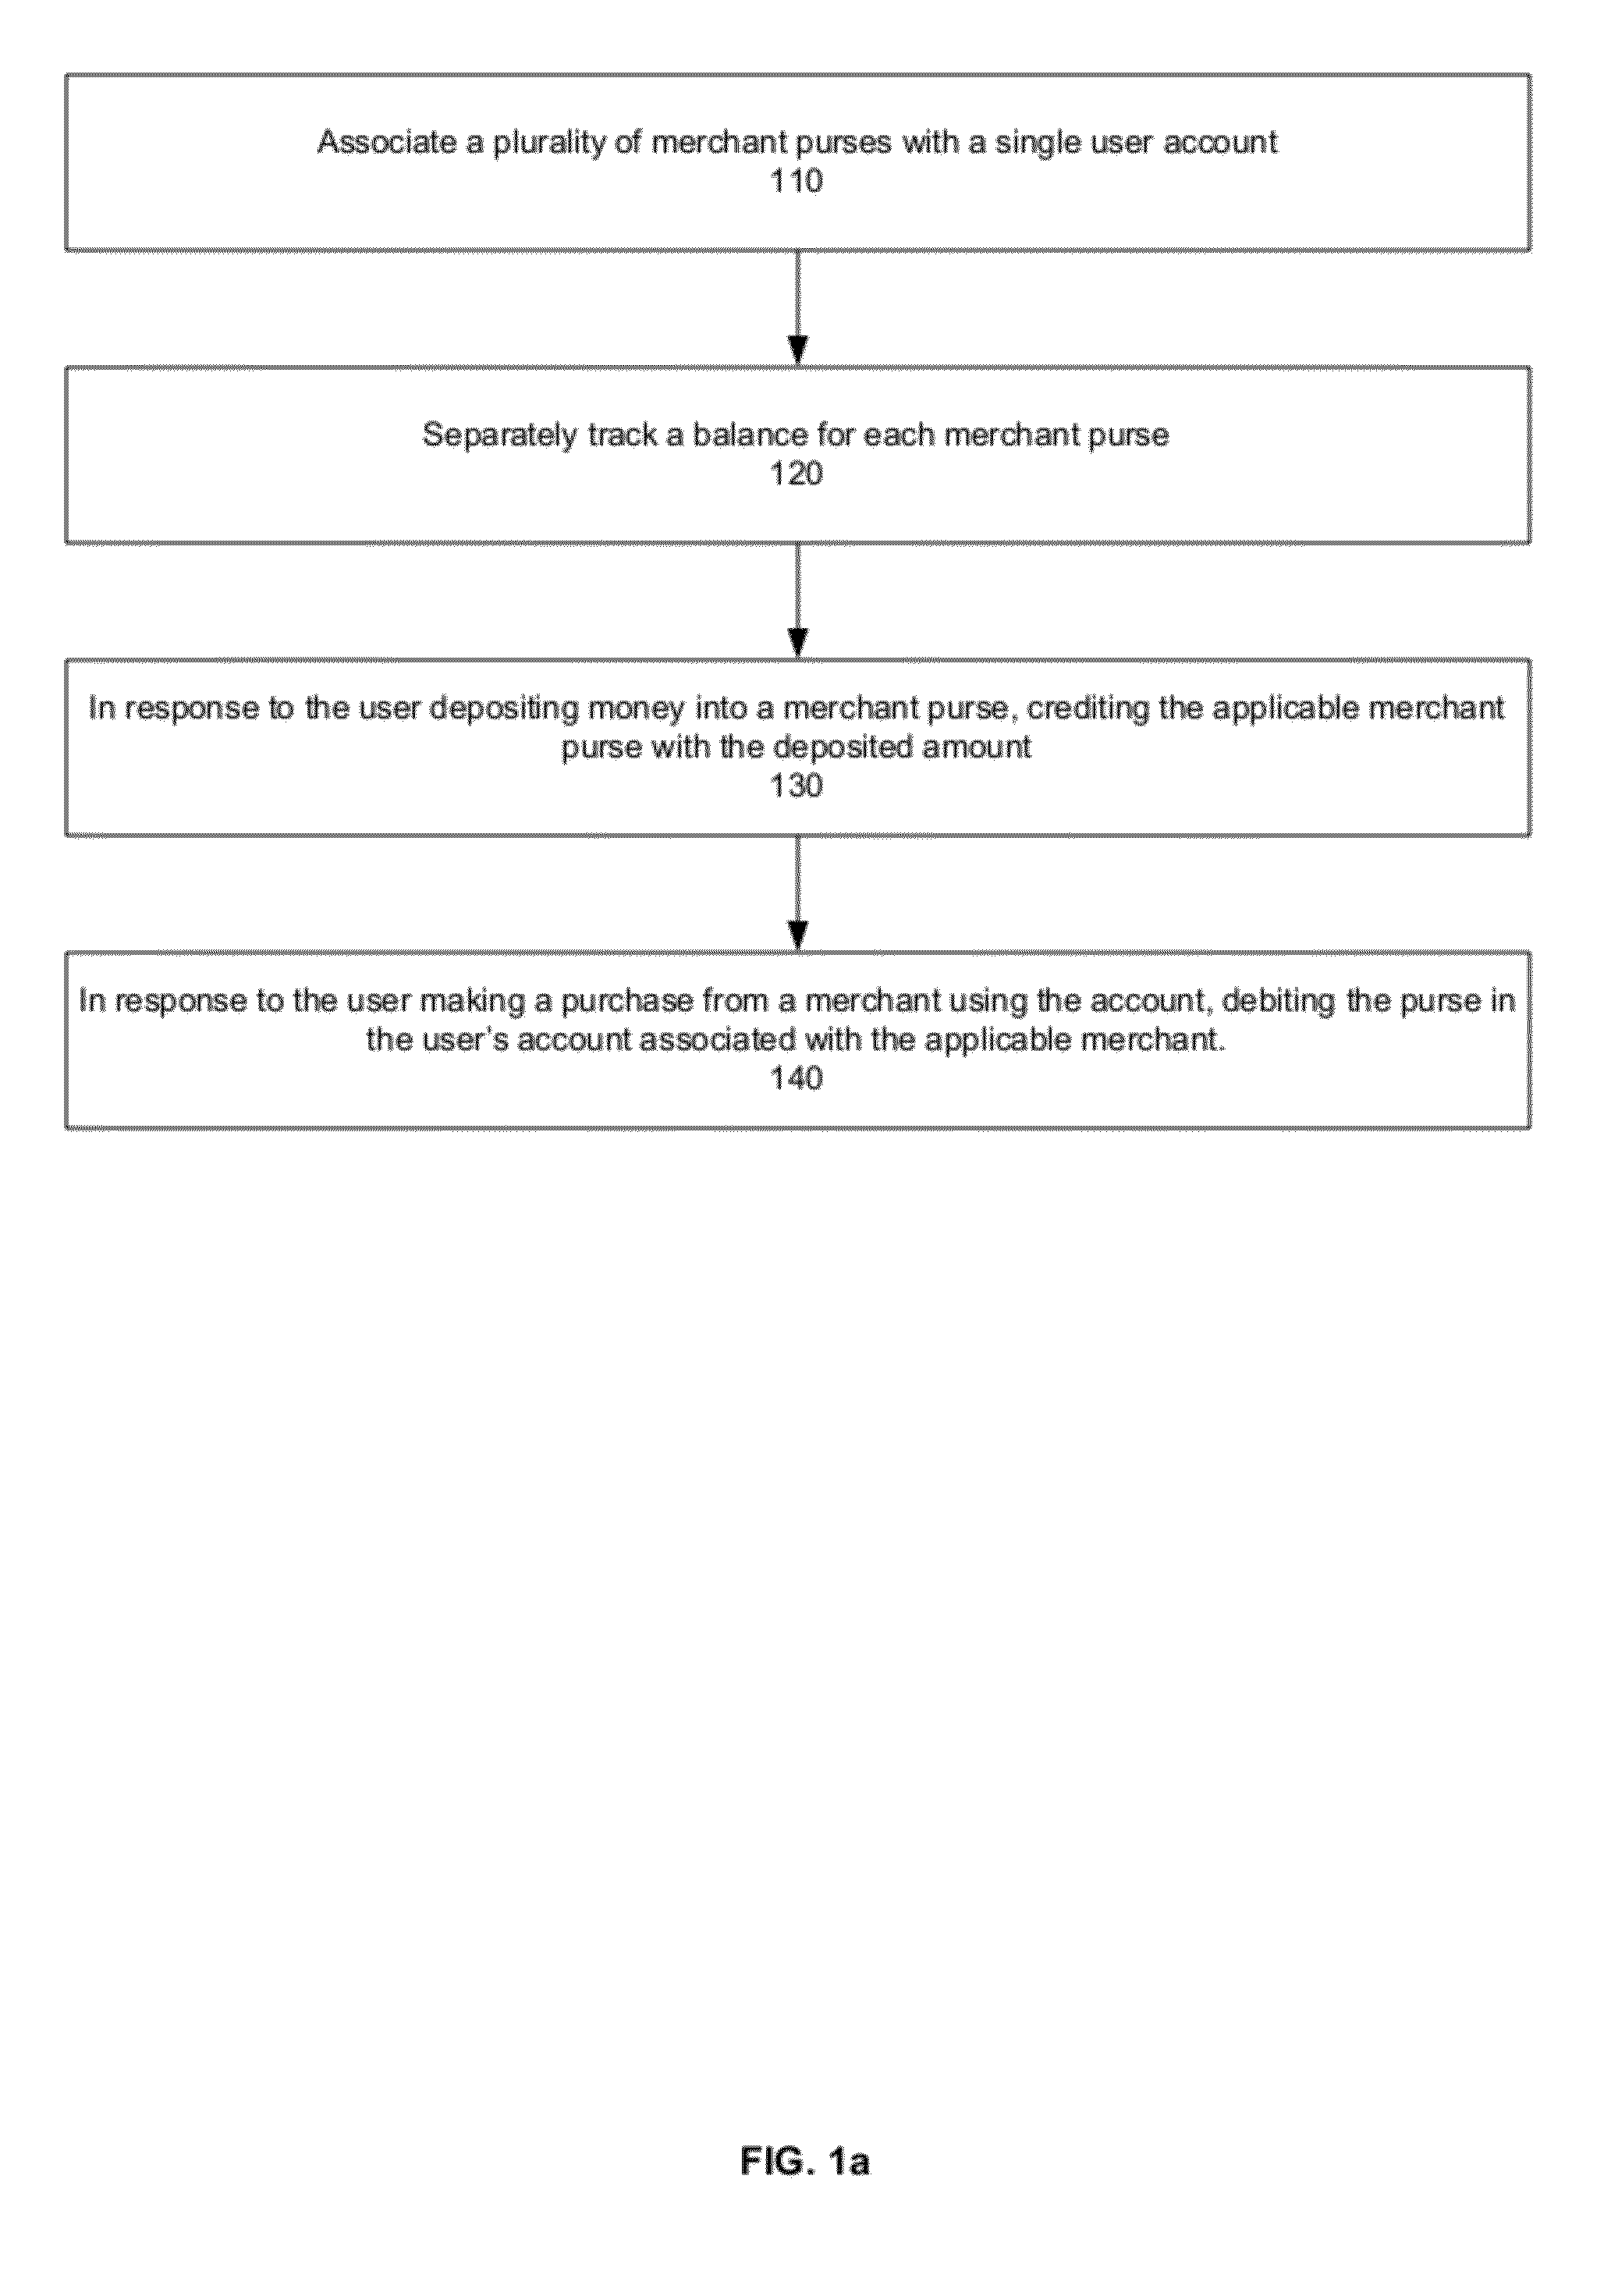 System and method for providing a user with a single payment card on which prepaid and/or reward balances are tracked for multiple merchants